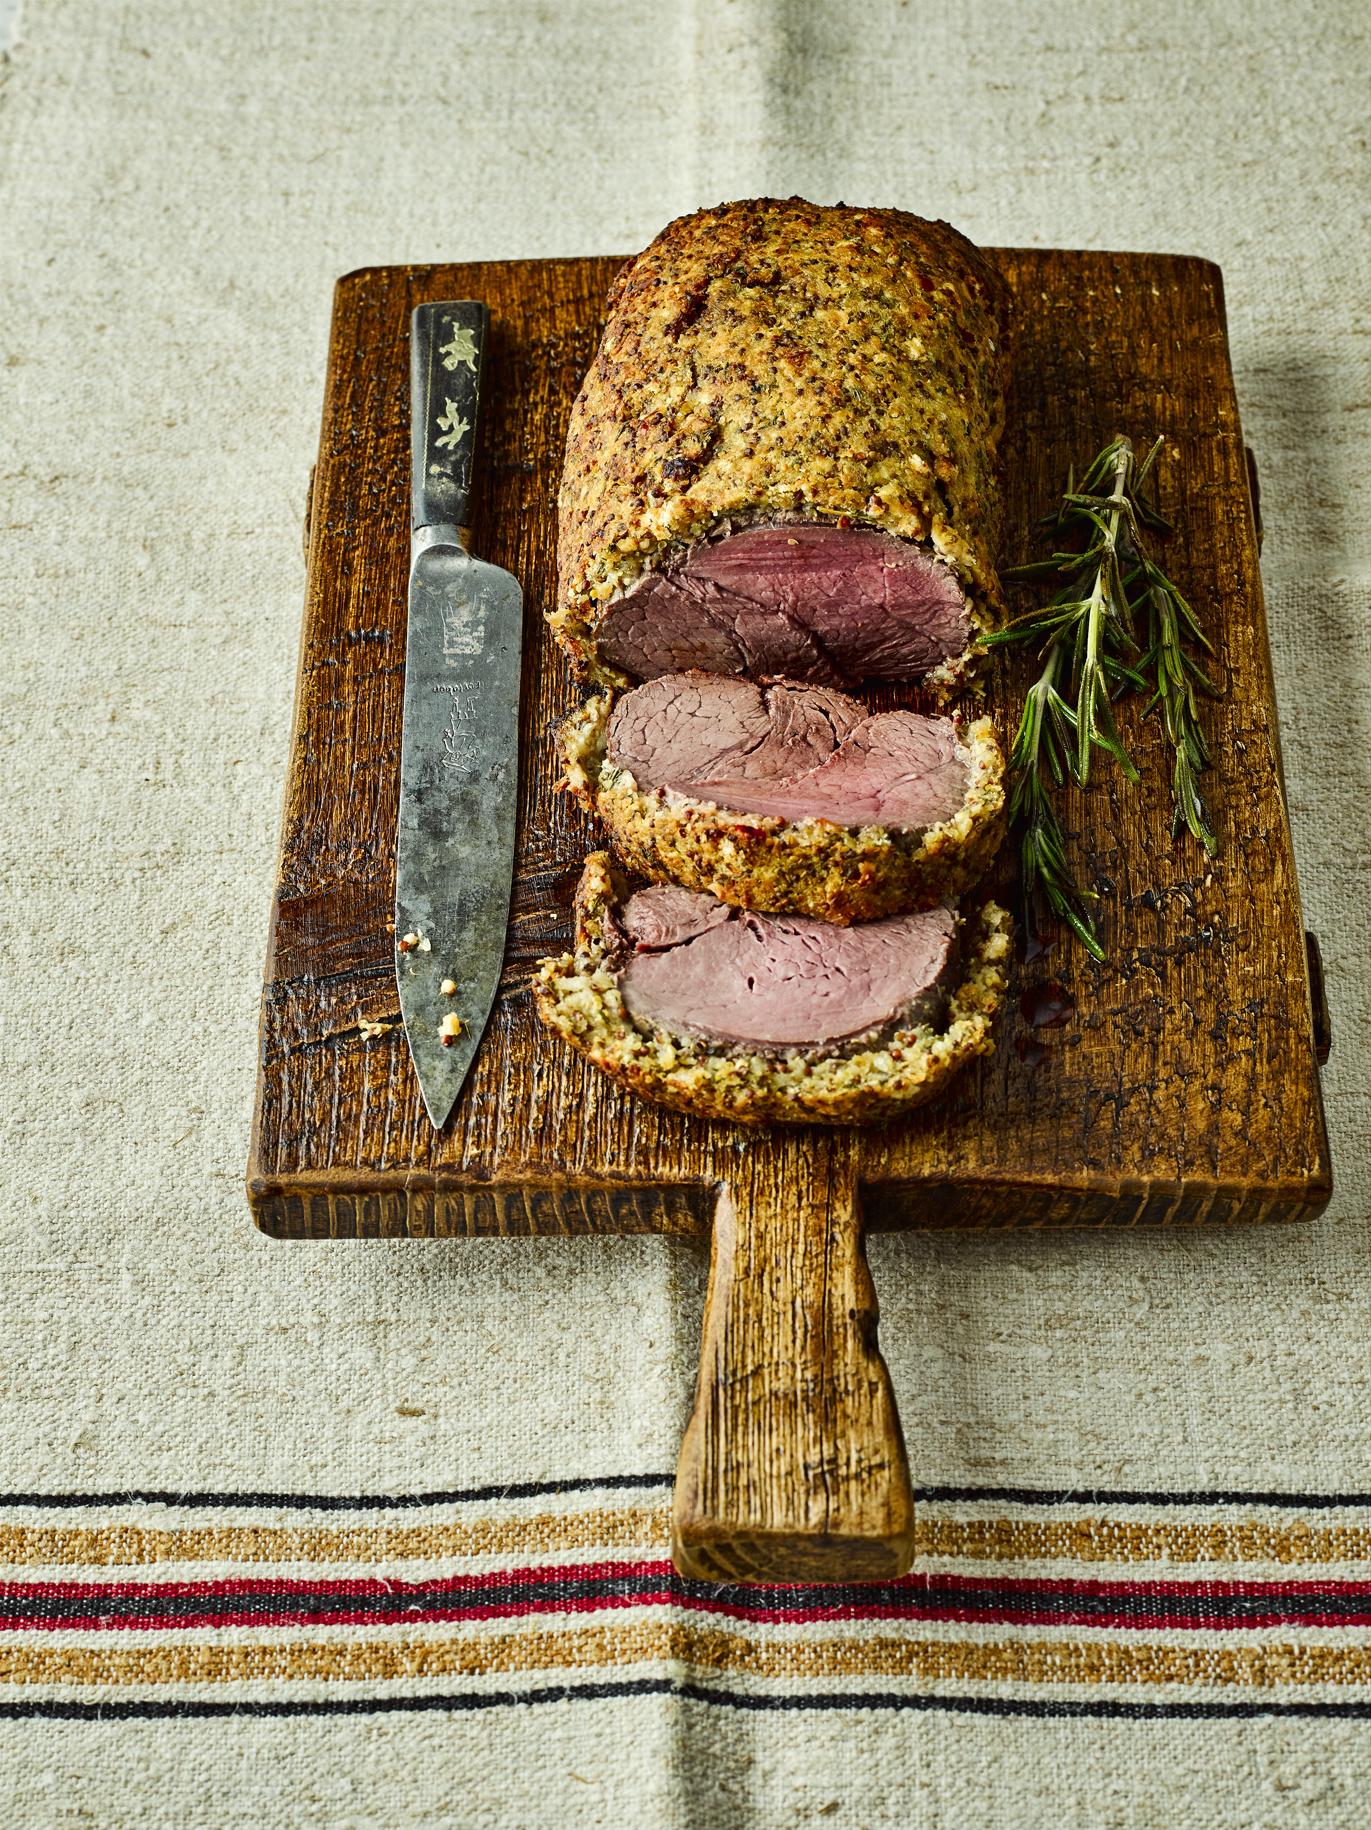 Fillet of beef with Robust Wholegrain Mustard and Tracklements Strong Horseradish Cream